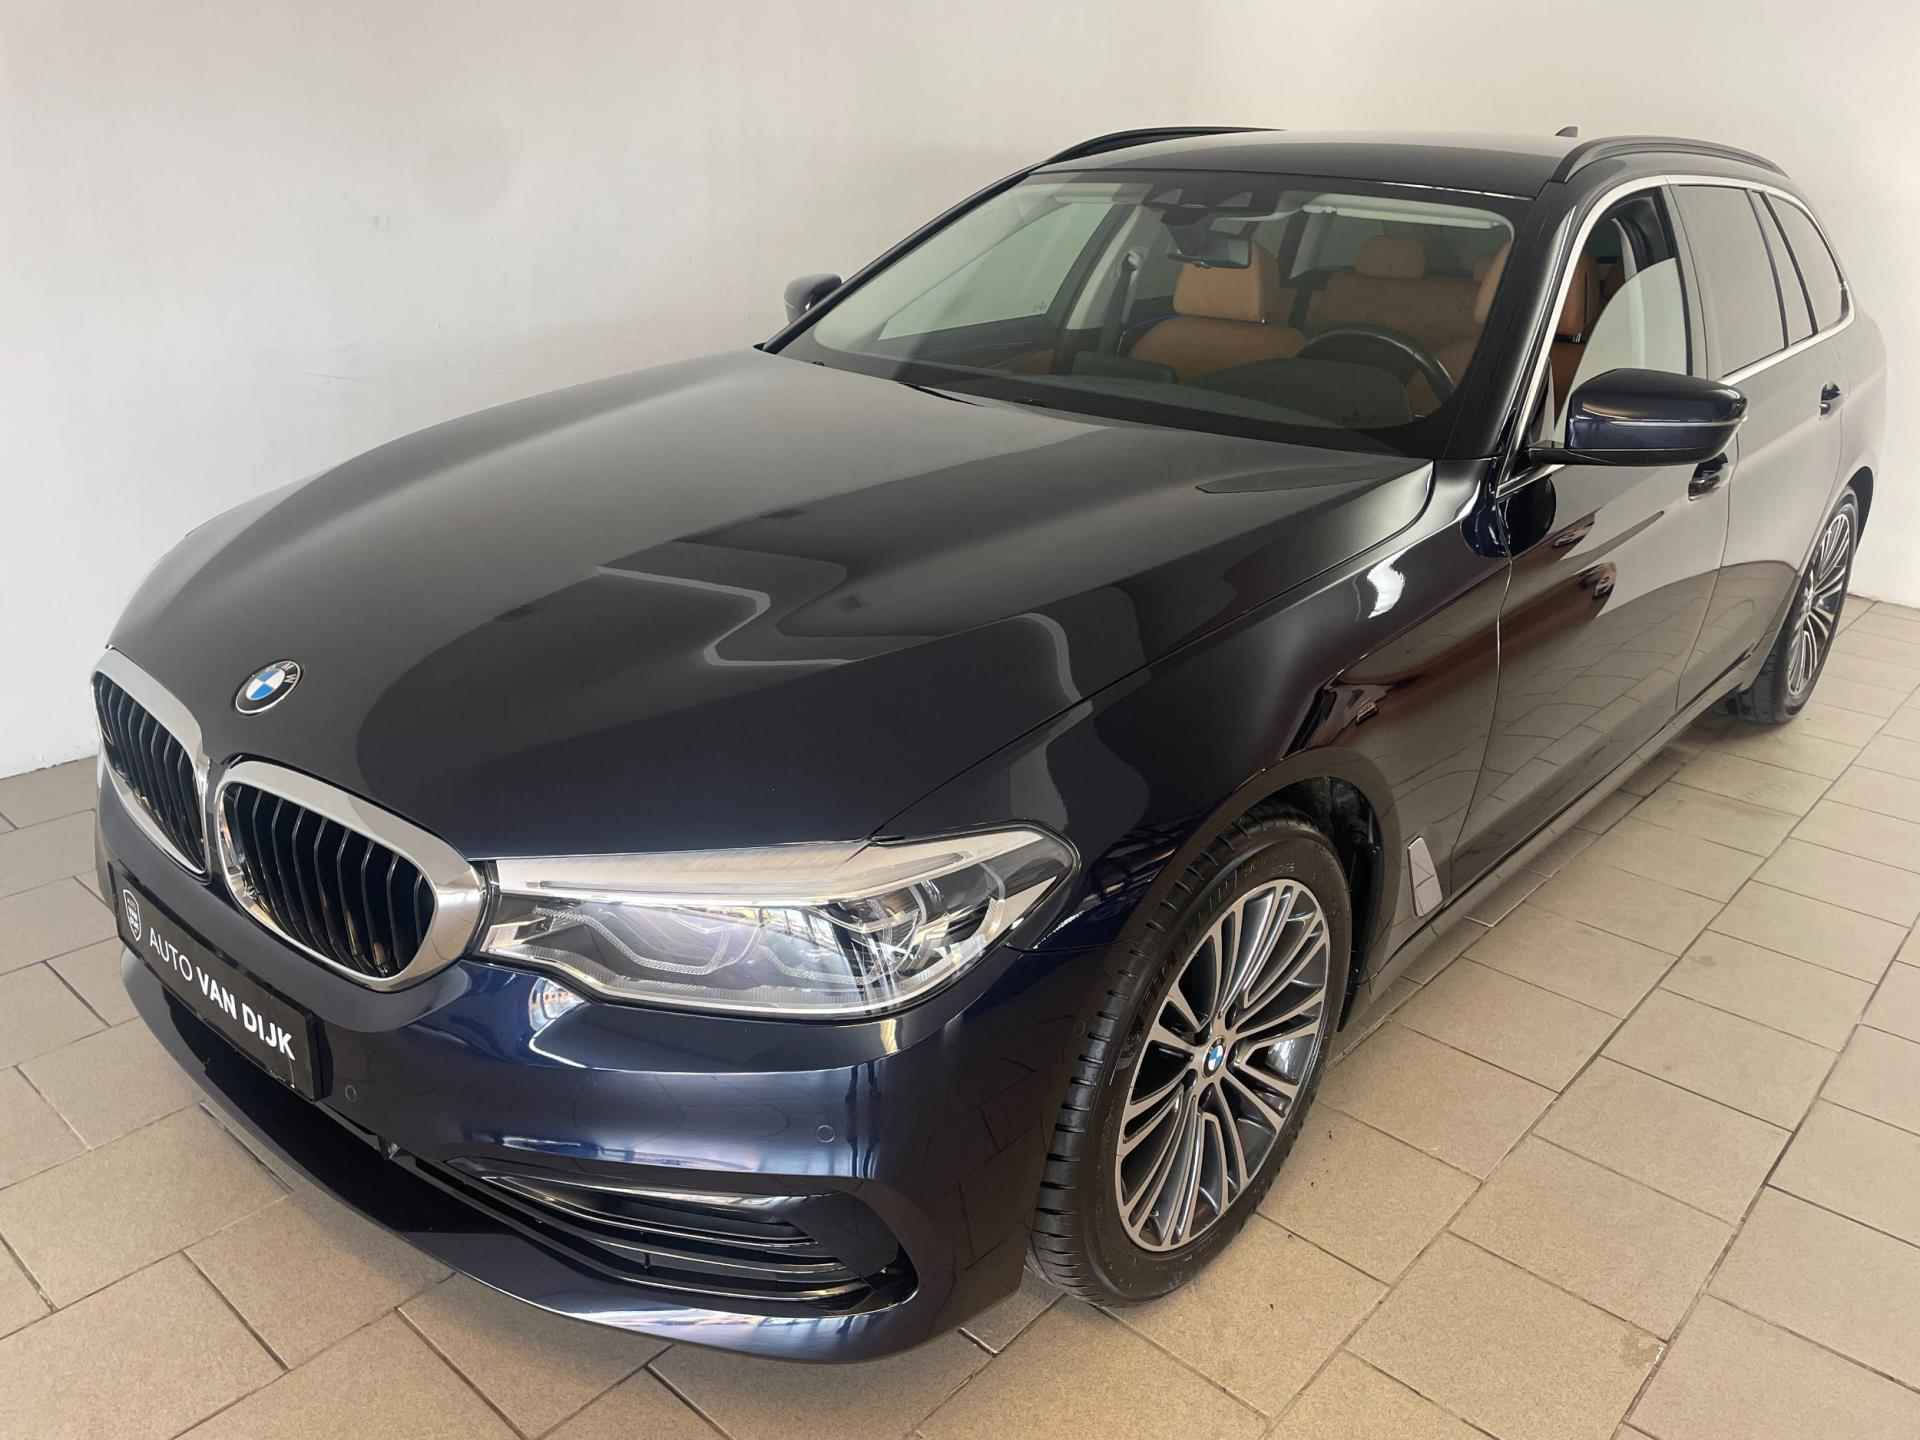 BMW 5-serie Touring 520i High Executive AUTOMAAT NAVI CRUISE BLUETOOTH LED VERL STUURVERW STOELVERW STOELVENT LEDER NIEUWSTAAT - 13/57